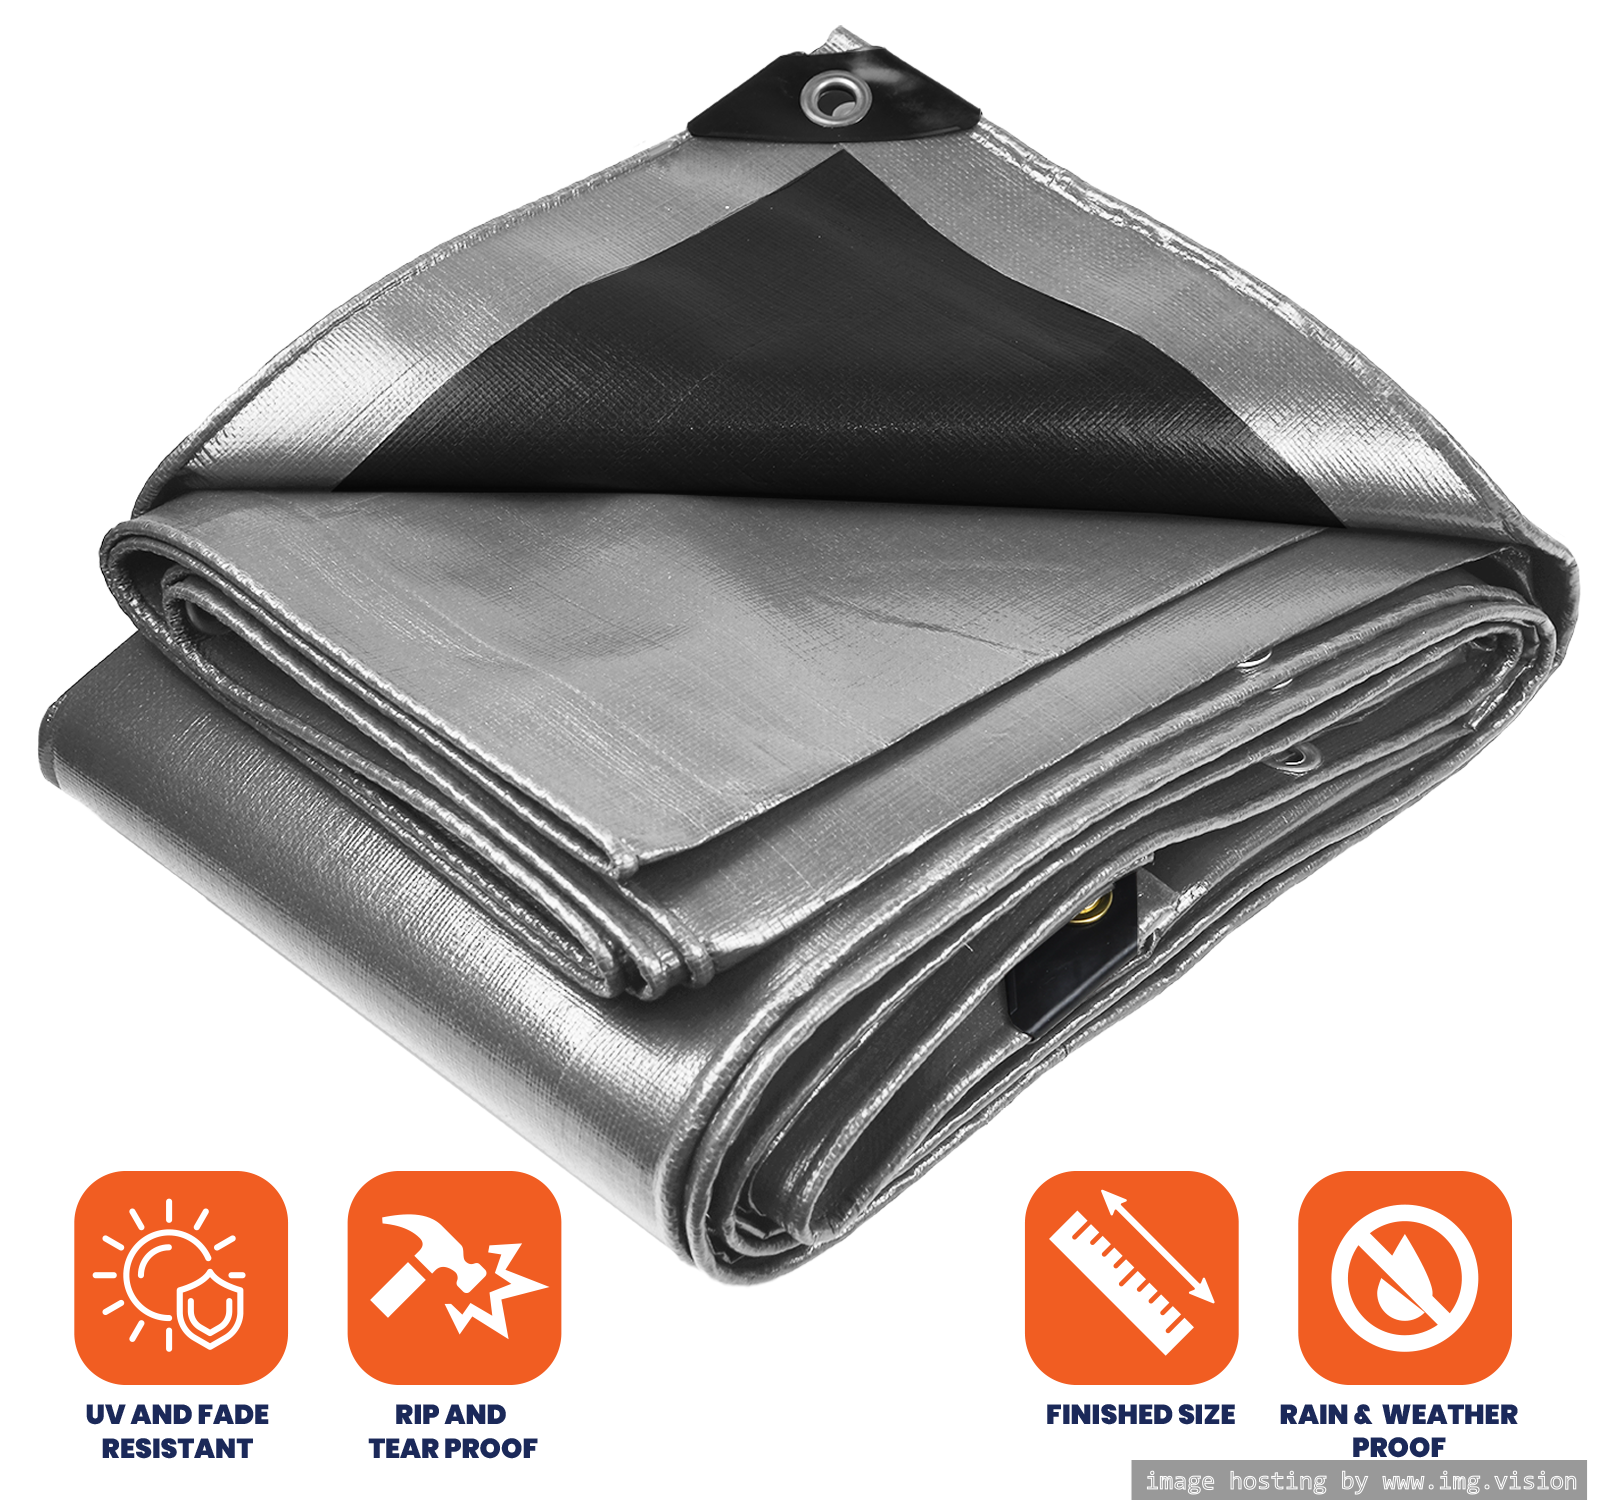 Tarpco Safety Heavy Duty 10 Mil Tarp Cover 12′ X 20′ Silver/Black UV Resistant, Rip and Tear Proof.